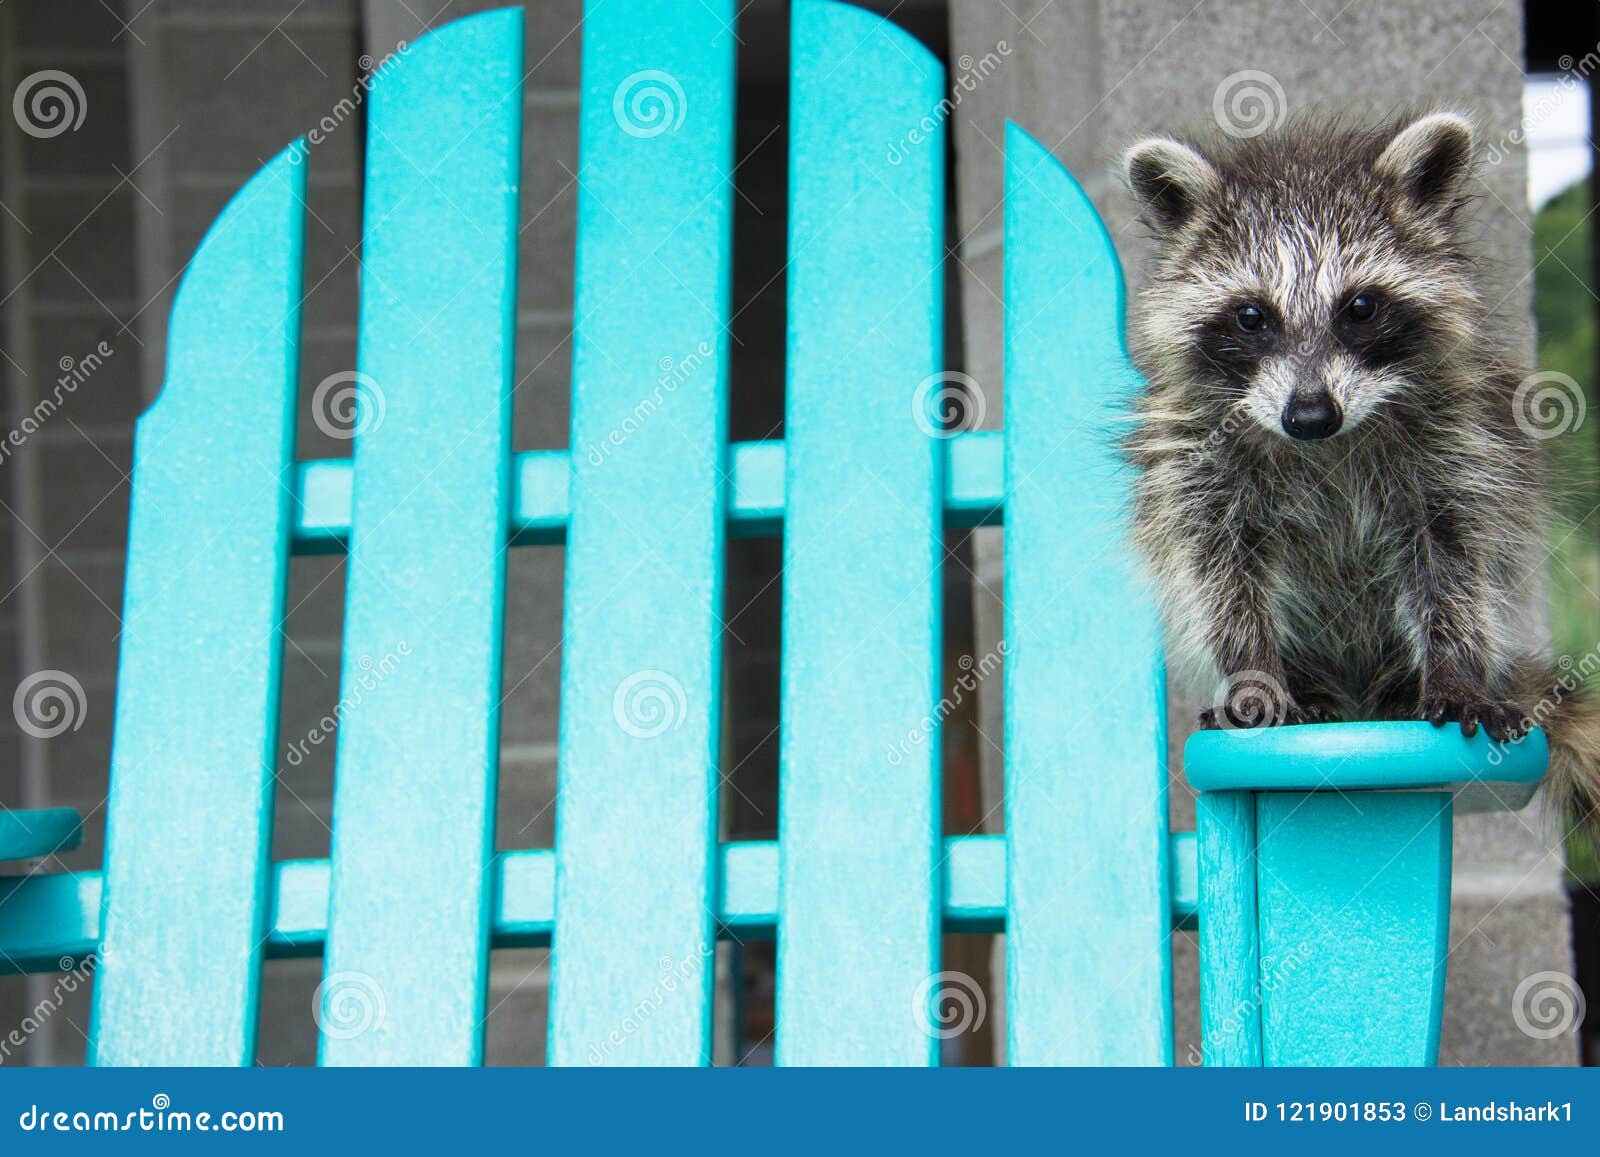 A Baby Raccoon Standing On An Adirondack Chair Stock Image